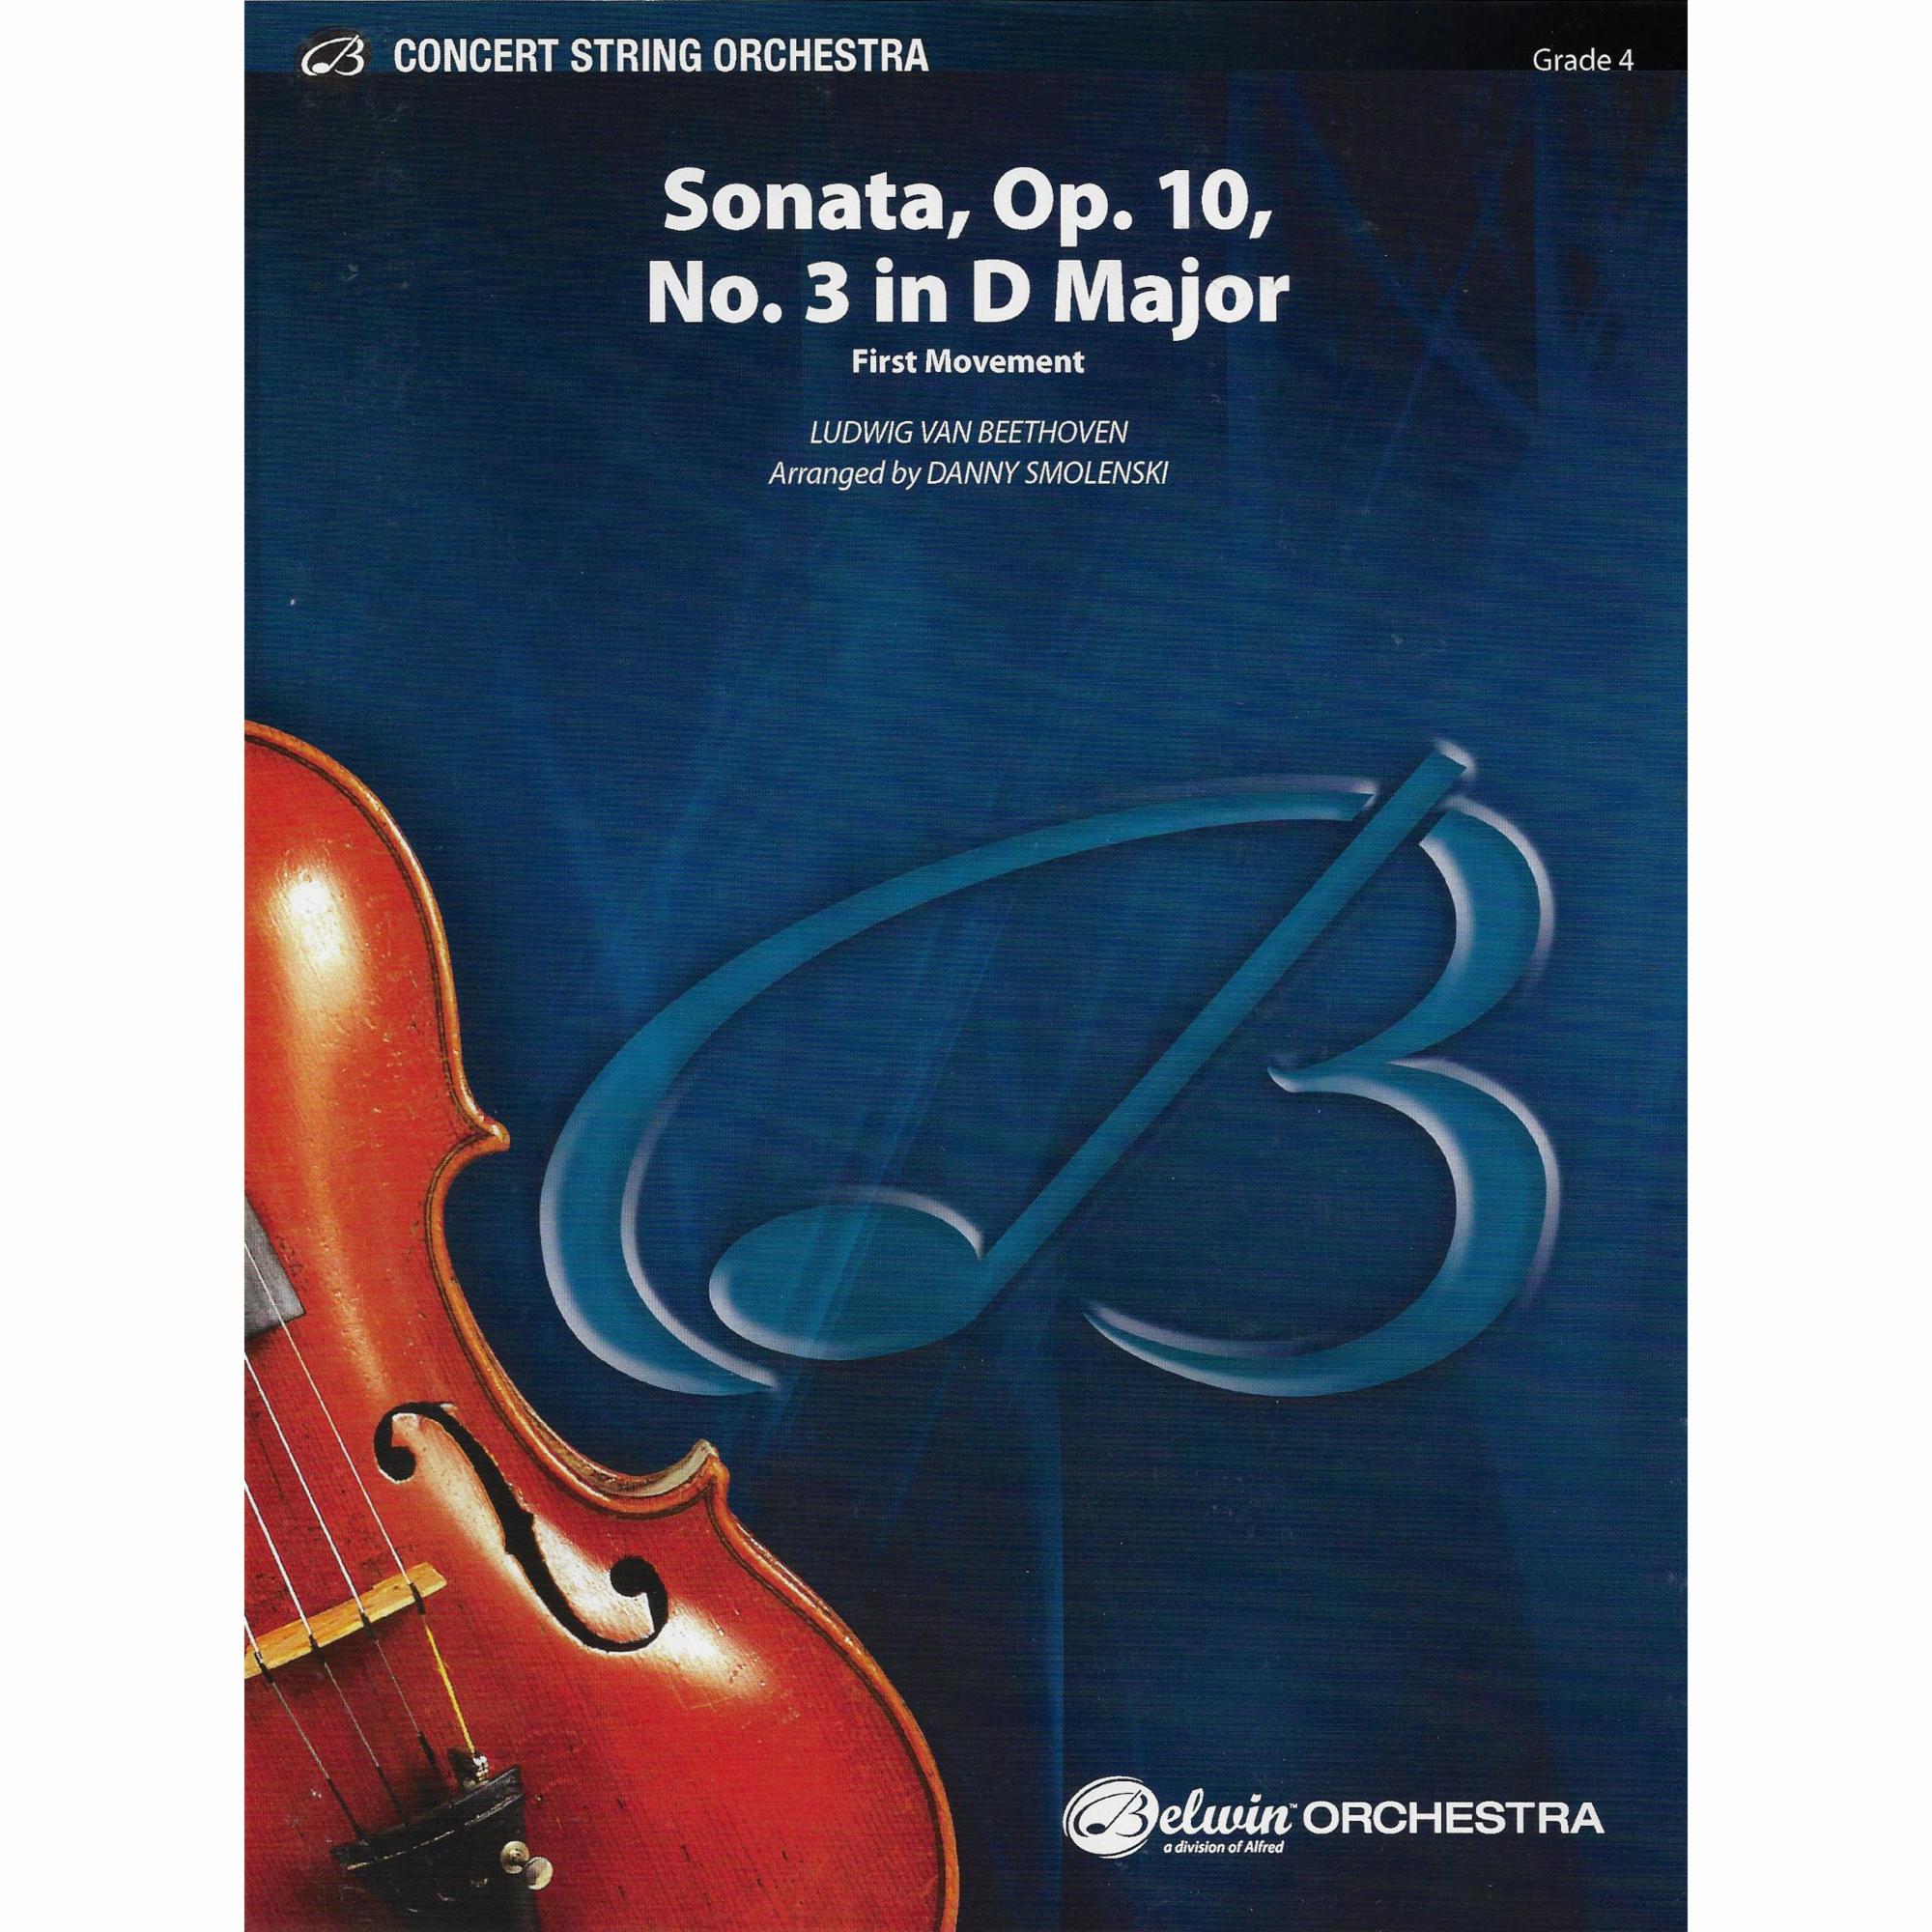 Piano Sonata, Op. 10, No. 3 in D Major for String Orchestra